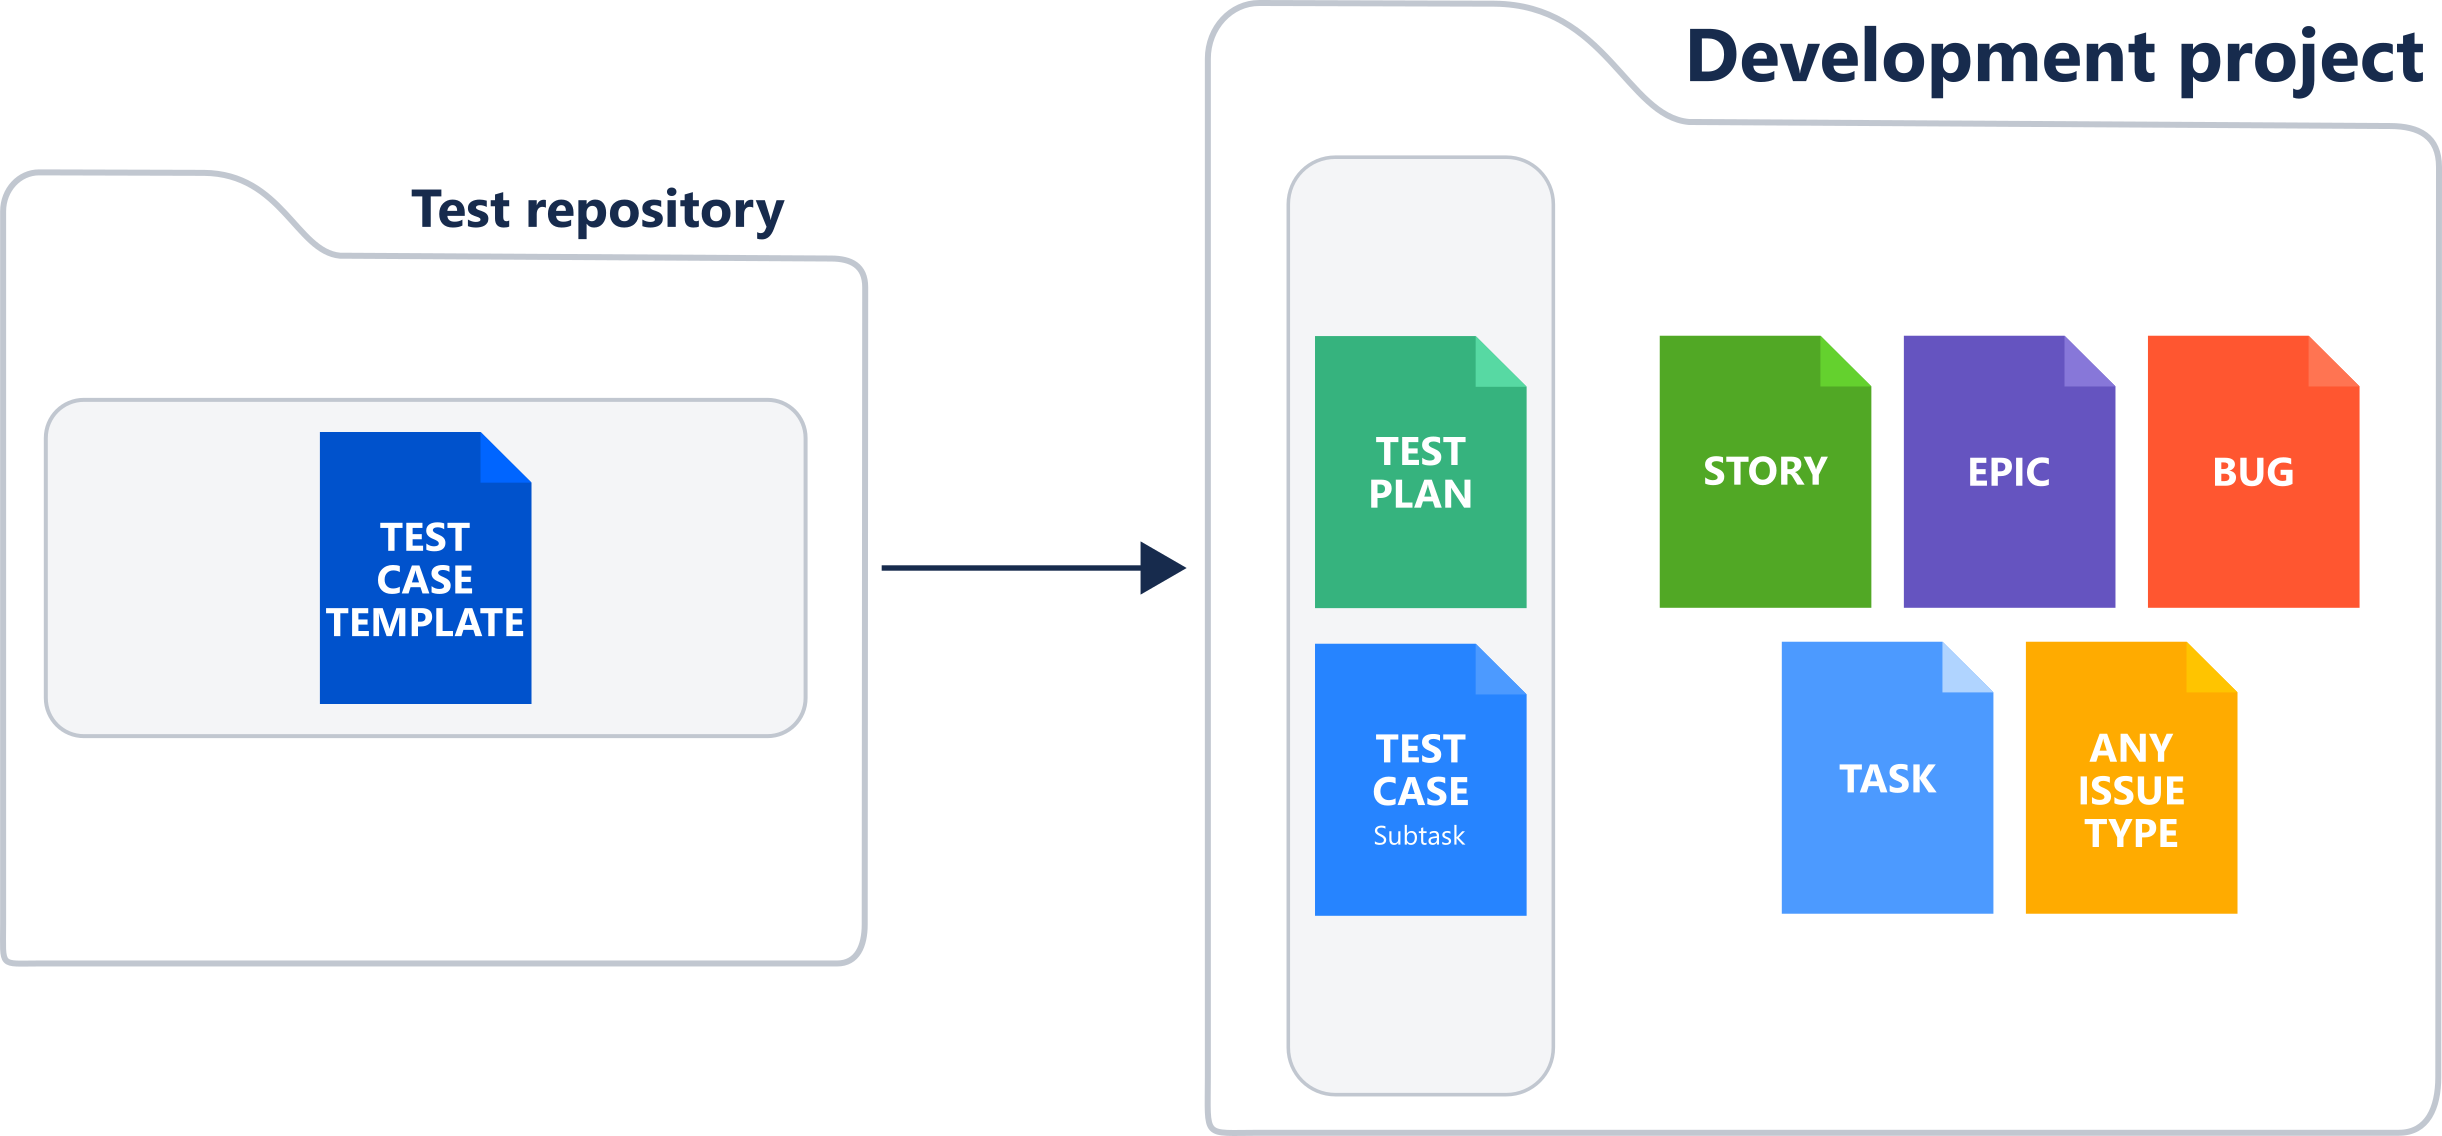 Separate test repository